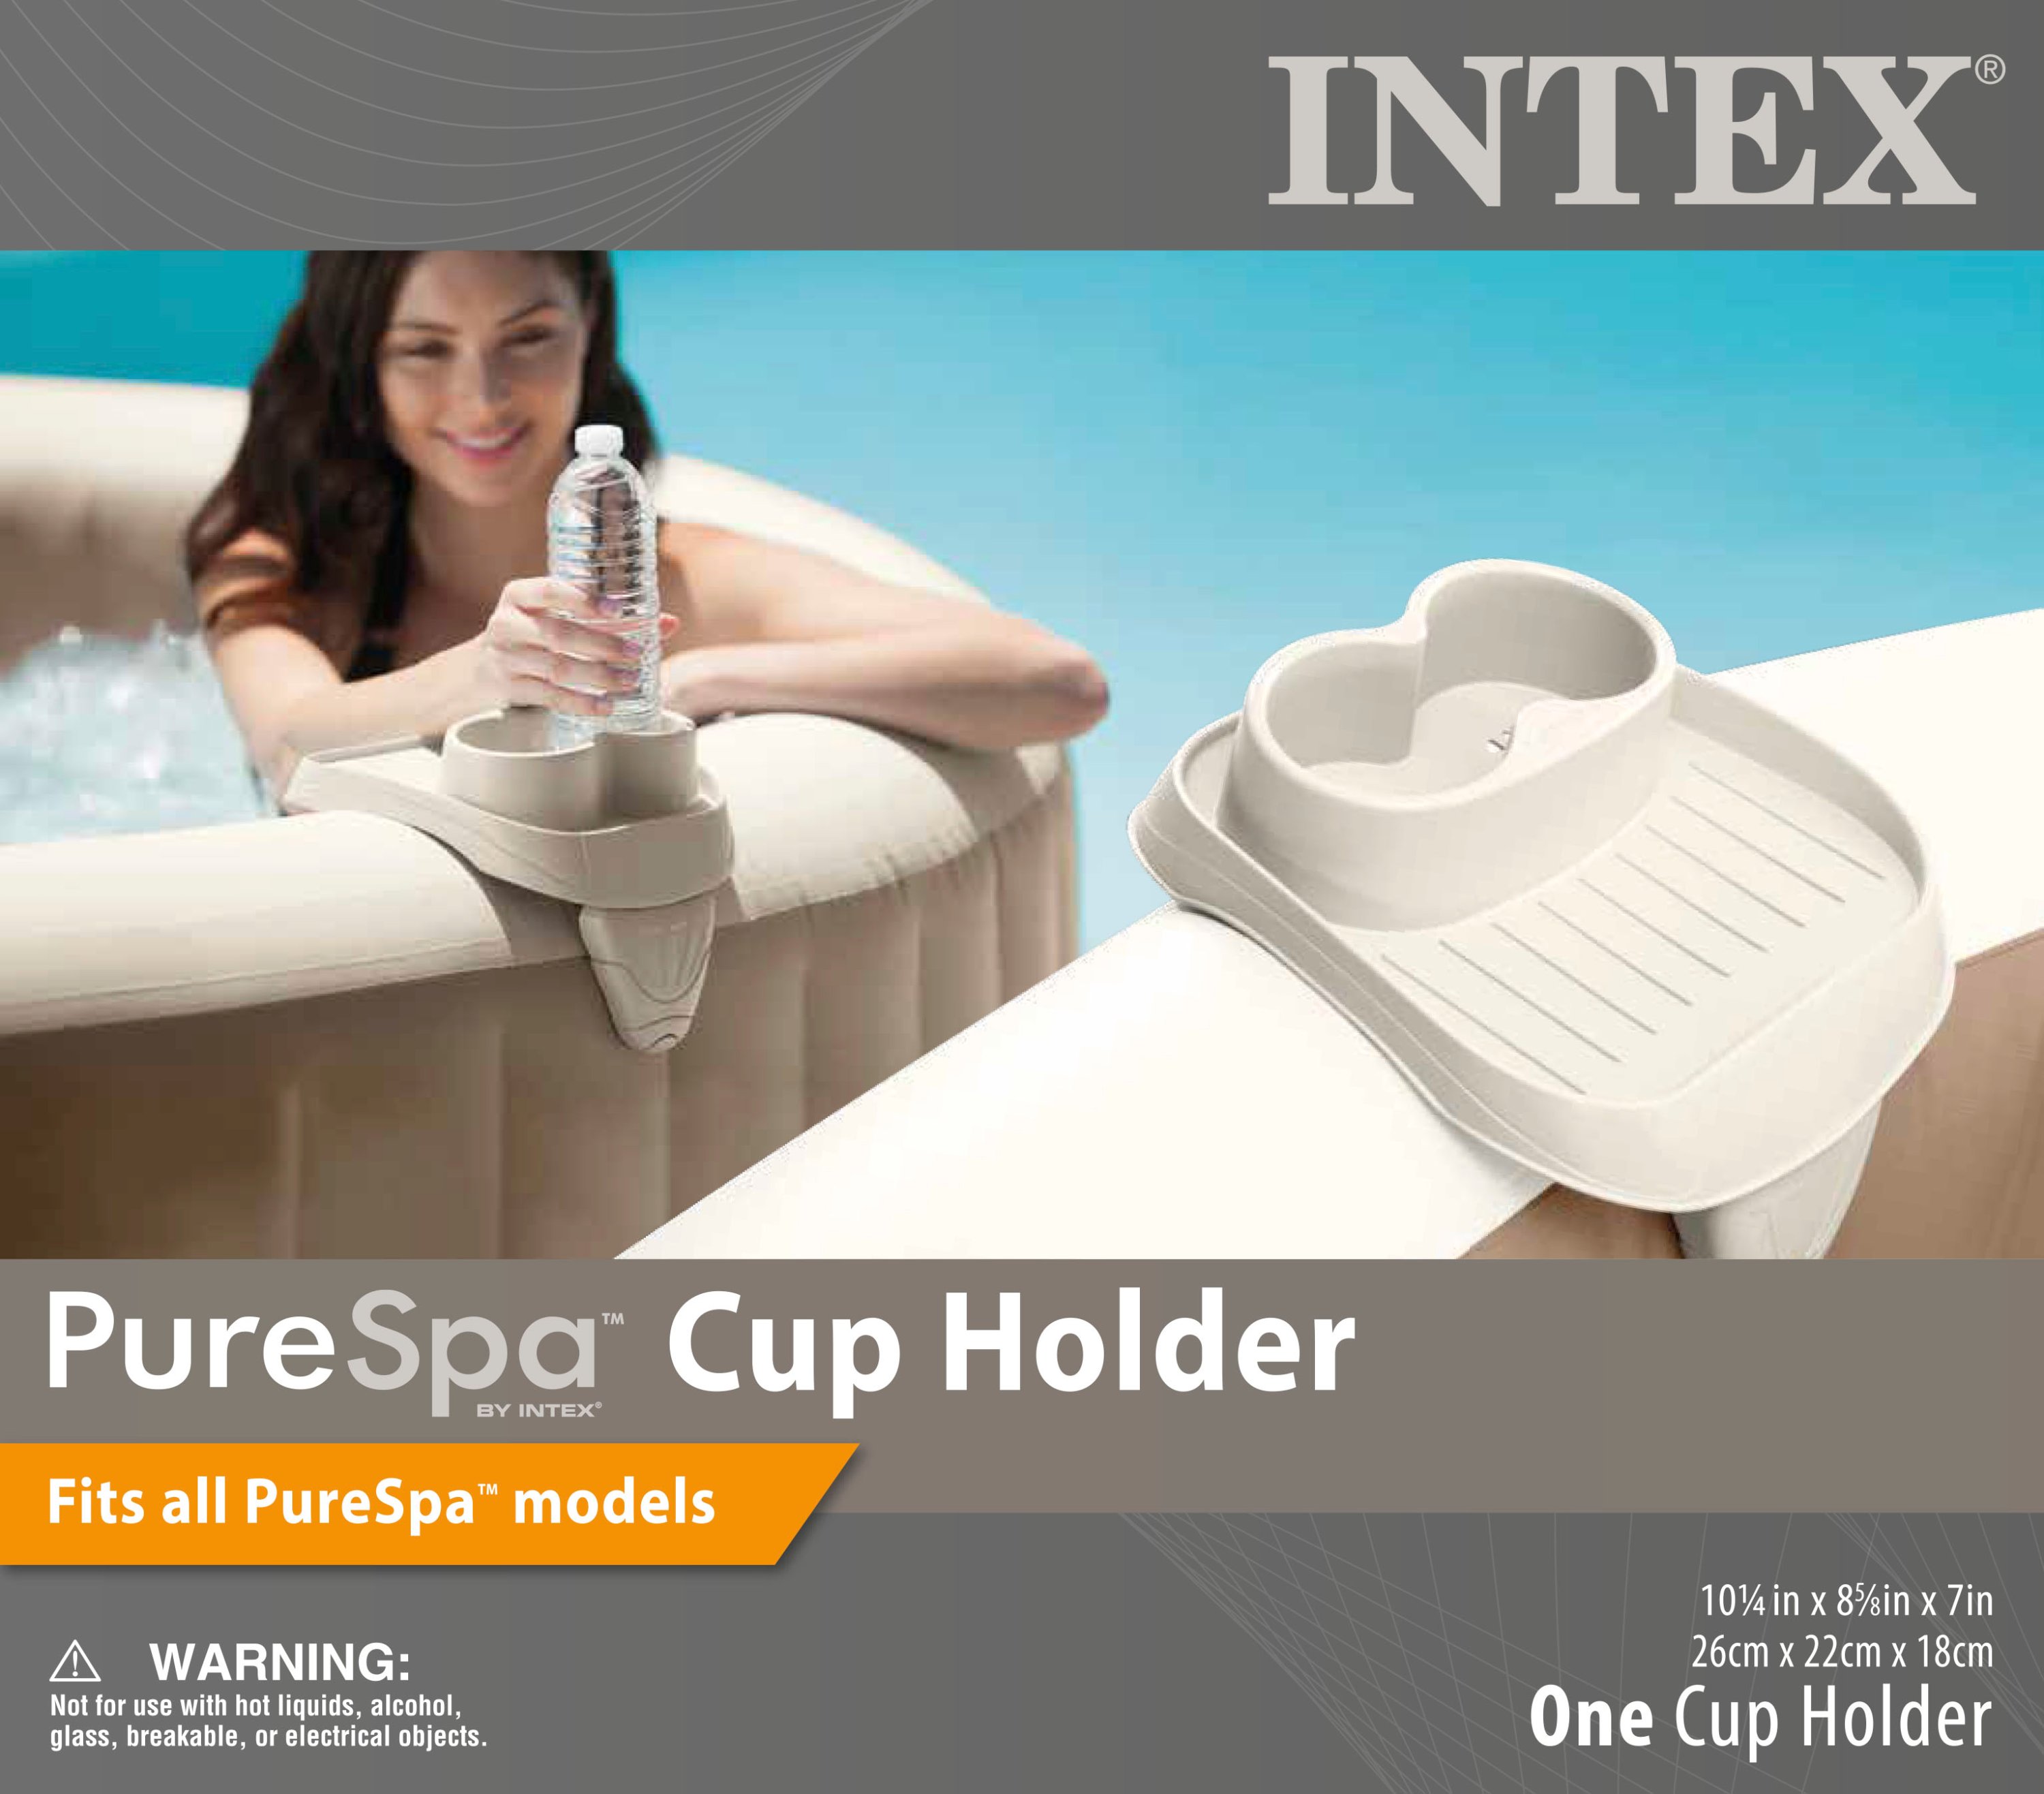 Intex PureSpa Attachable Cup Holder and Refreshment Tray Accessory, Tan 